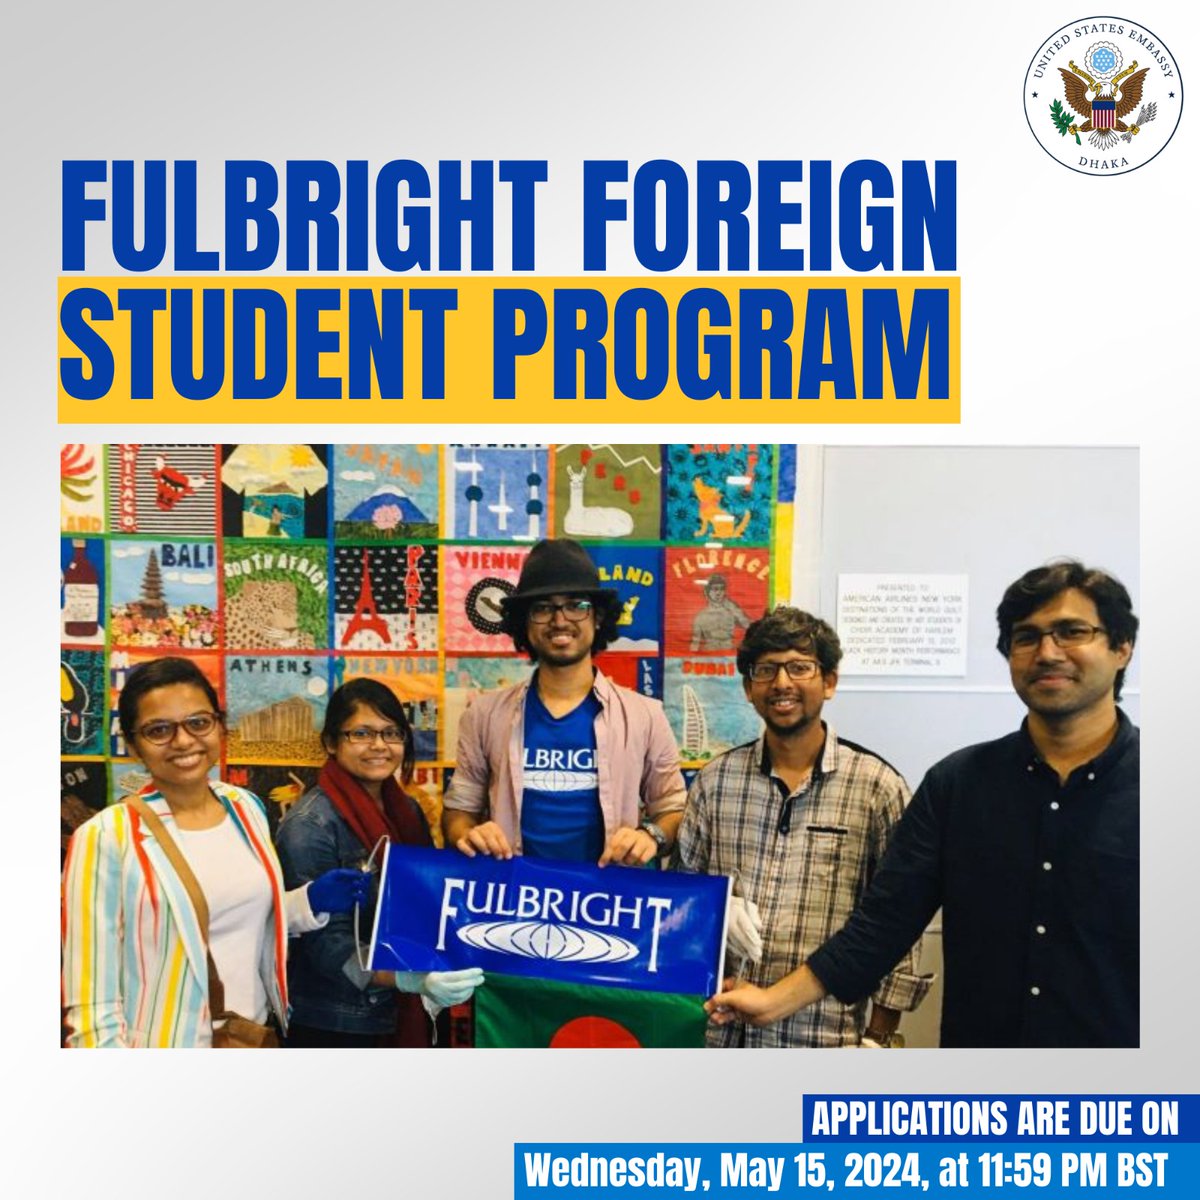 Are you a highly motivated young professional working in higher education or research? Are you passionate about sharing knowledge across communities and collaborating on projects that improve lives worldwide? If so, apply now for the Fulbright Foreign Student Program, which